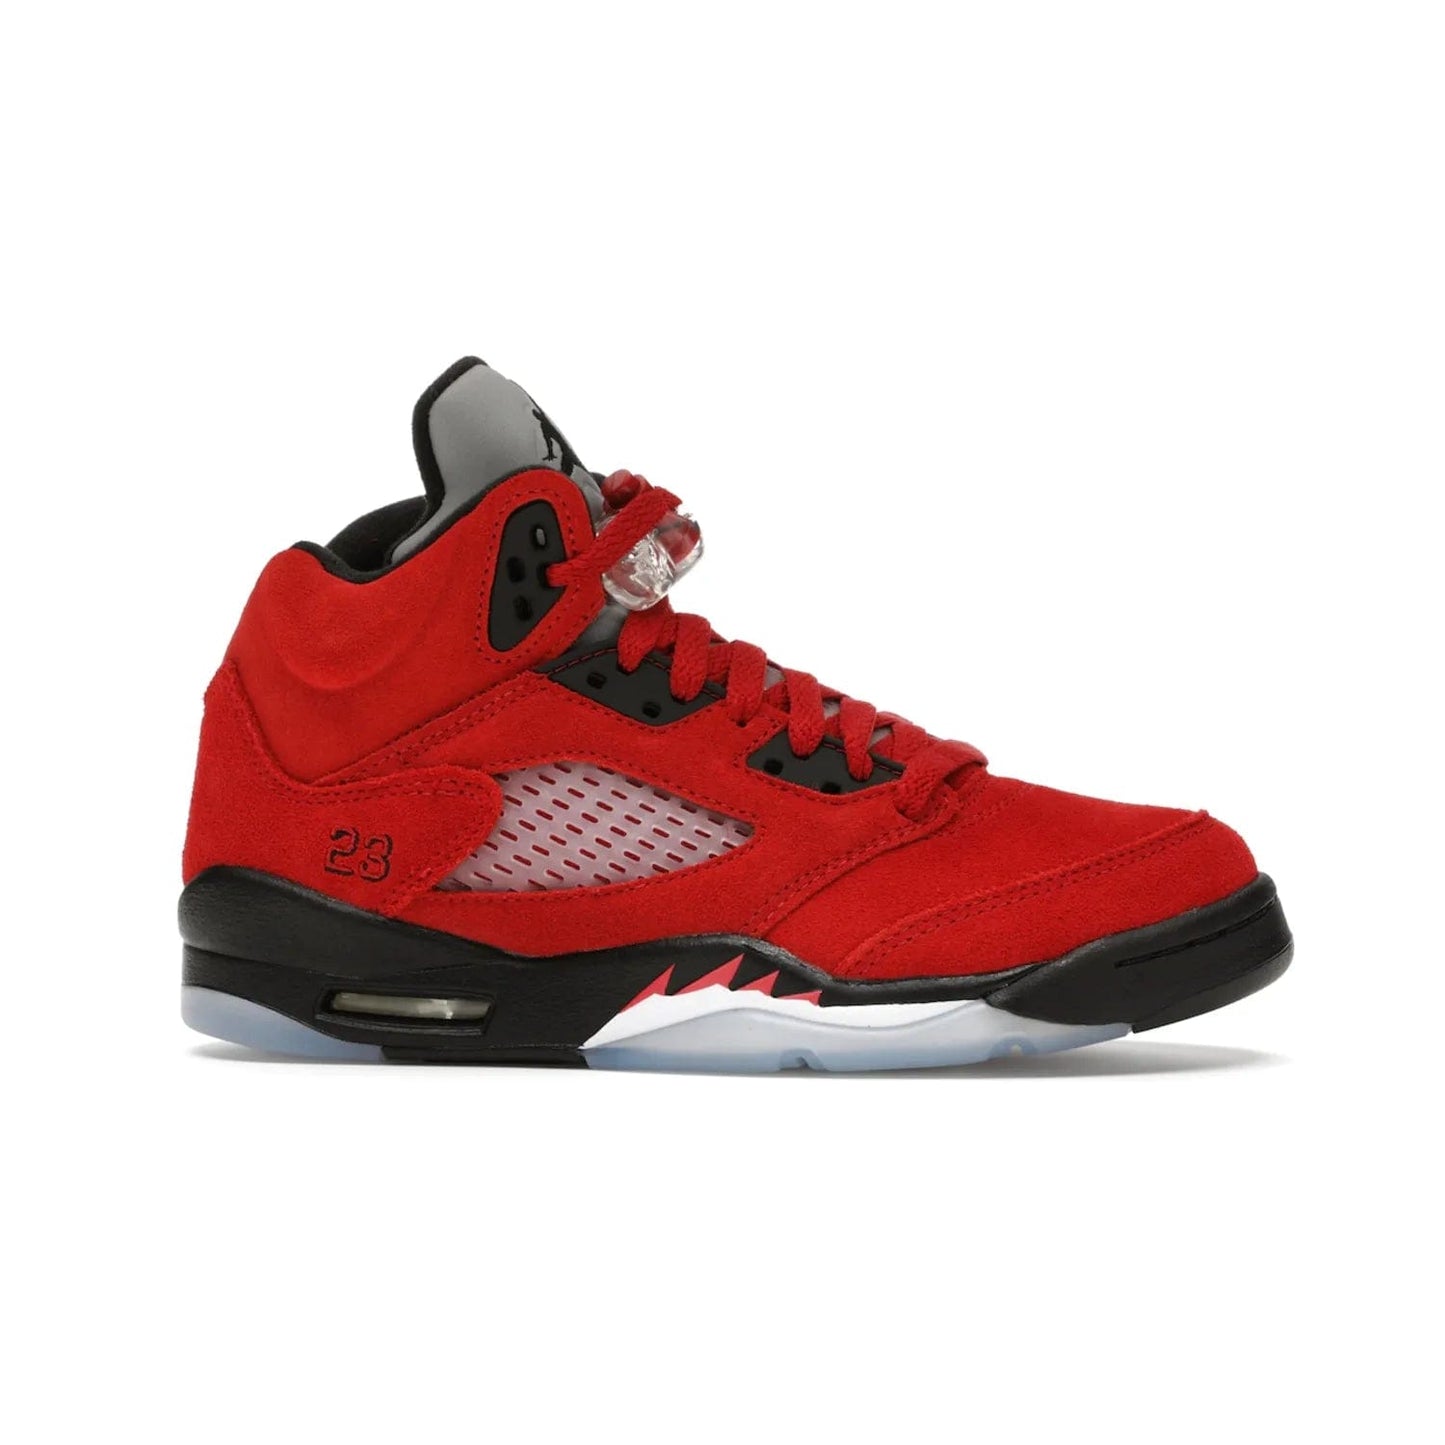 Jordan 5 Retro Raging Bull Red (2021) (GS) - Image 2 - Only at www.BallersClubKickz.com - Jordan 5 Retro Raging Bulls Red 2021 GS. Varsity Red suede upper with embroidered number 23, black leather detail, red laces, and midsole with air cushioning. Jumpman logos on tongue, heel, and outsole. On-trend streetwear and basketball style. Released April 10, 2021.